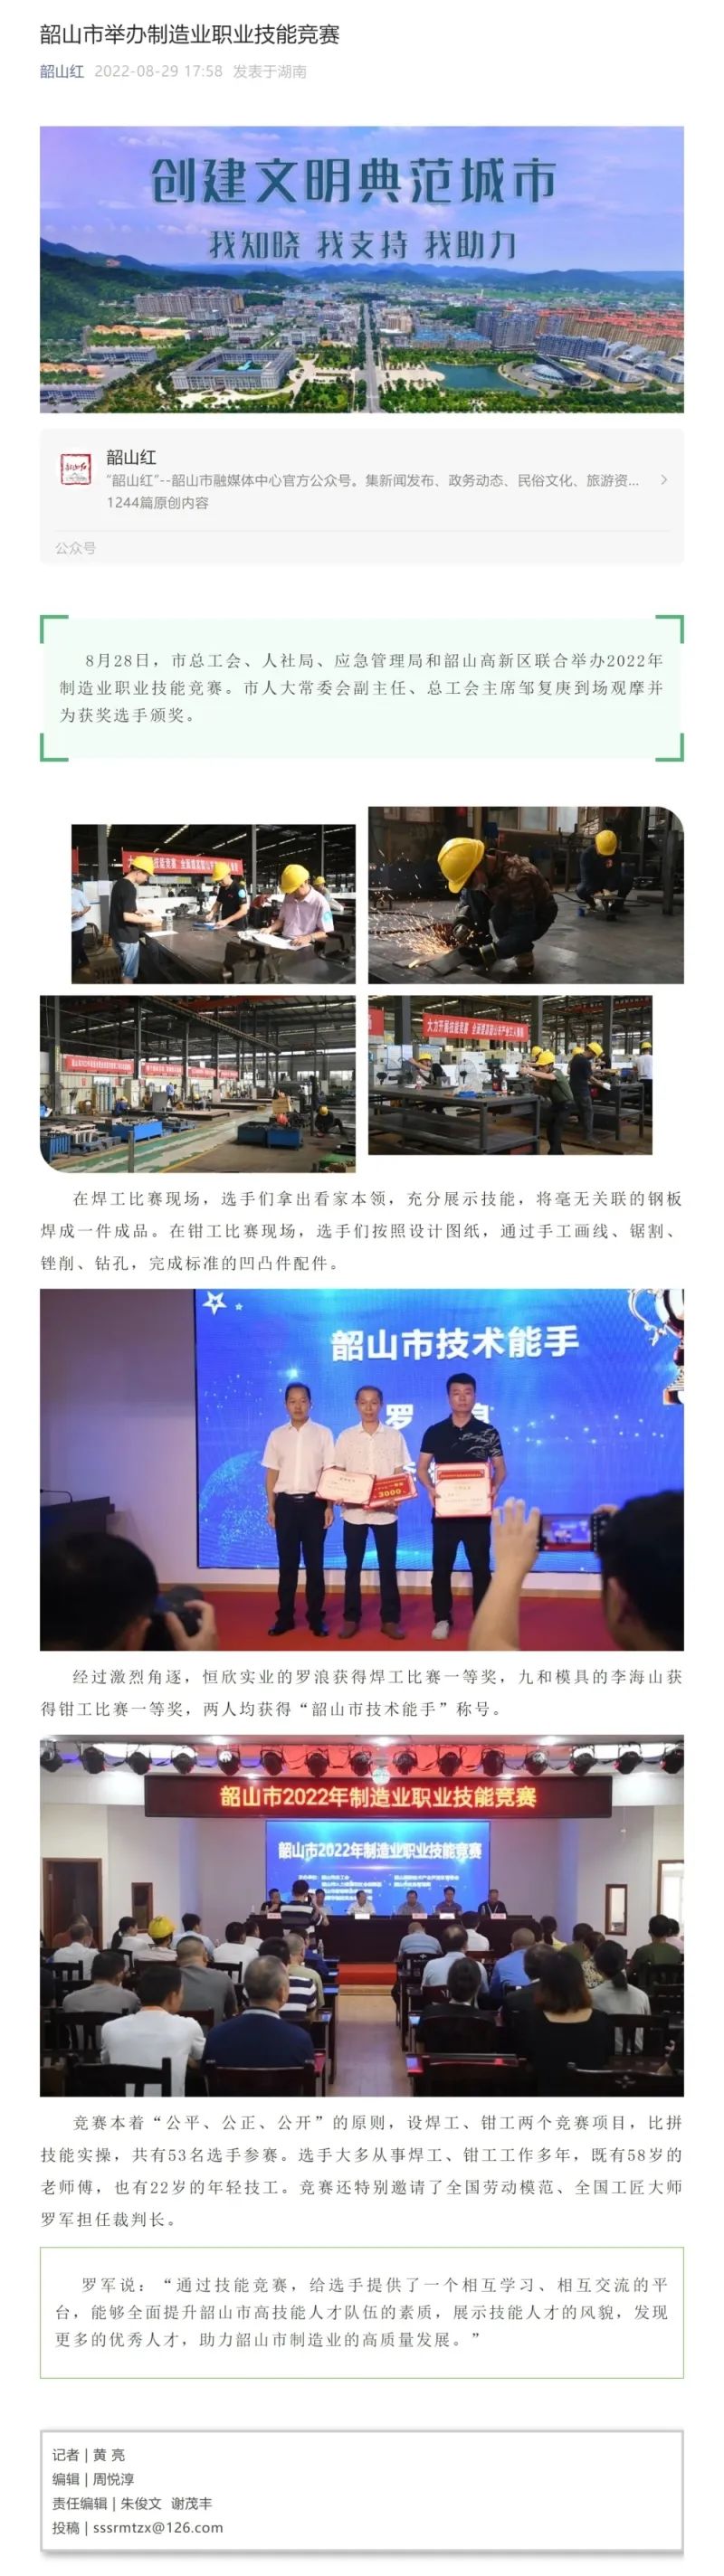 Shaoshan Vocational Skills Competition is held in our companyShaoshan Vocational Skills Competition is held in our company